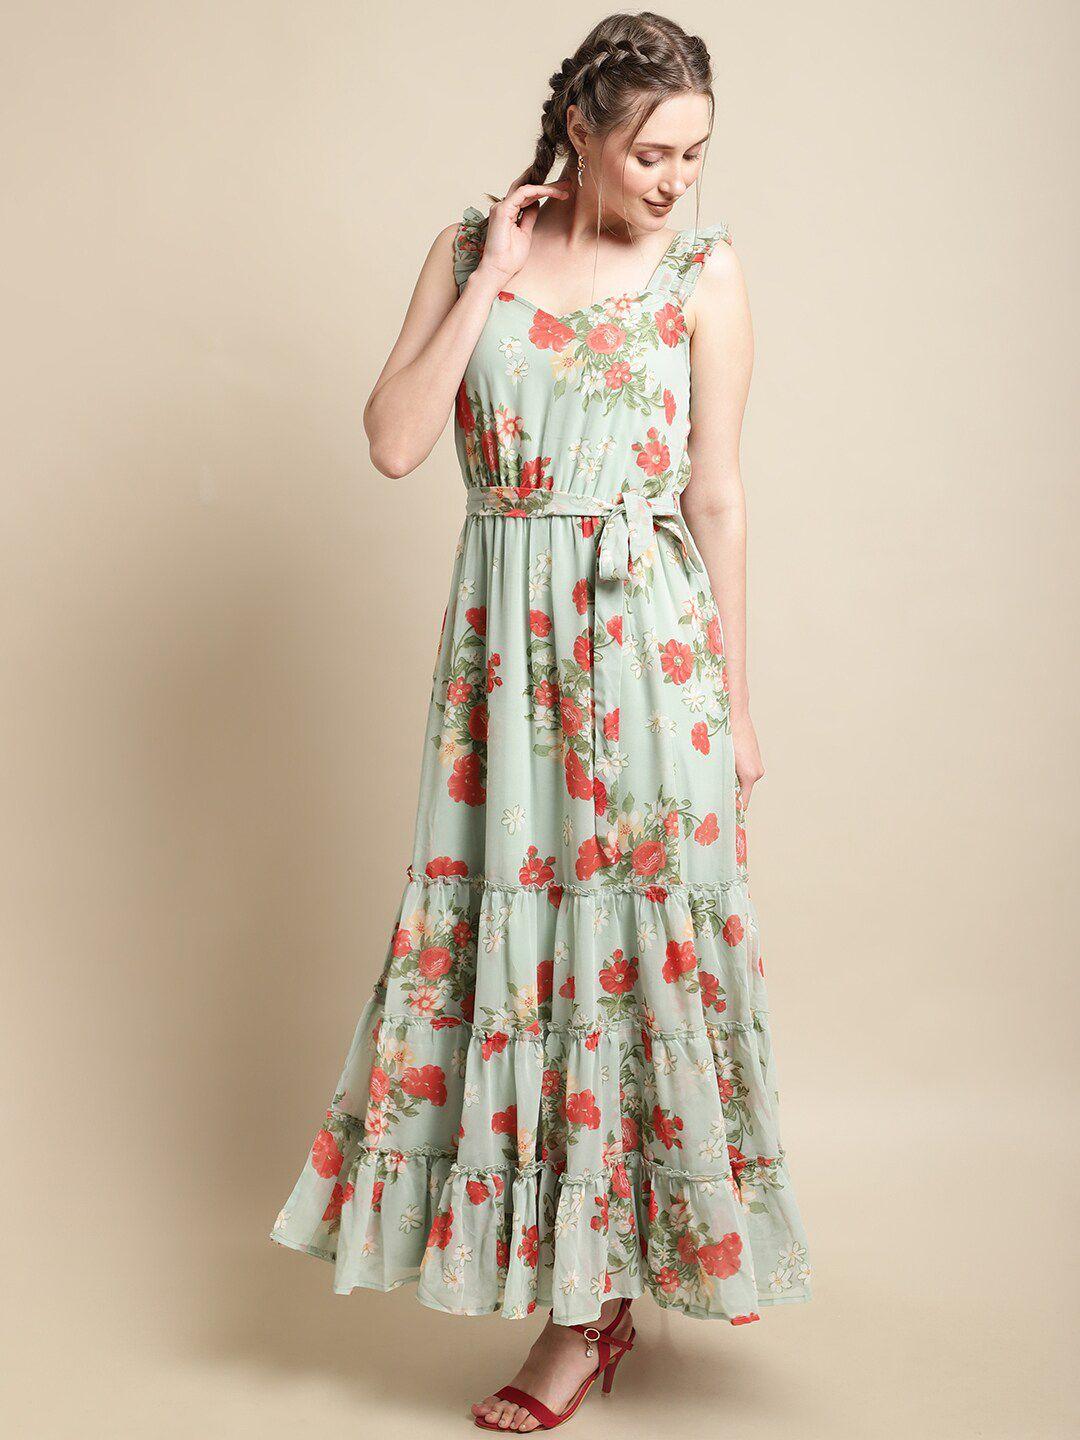 la zoire floral printed shoulder strapped ruffled georgette maxi dress